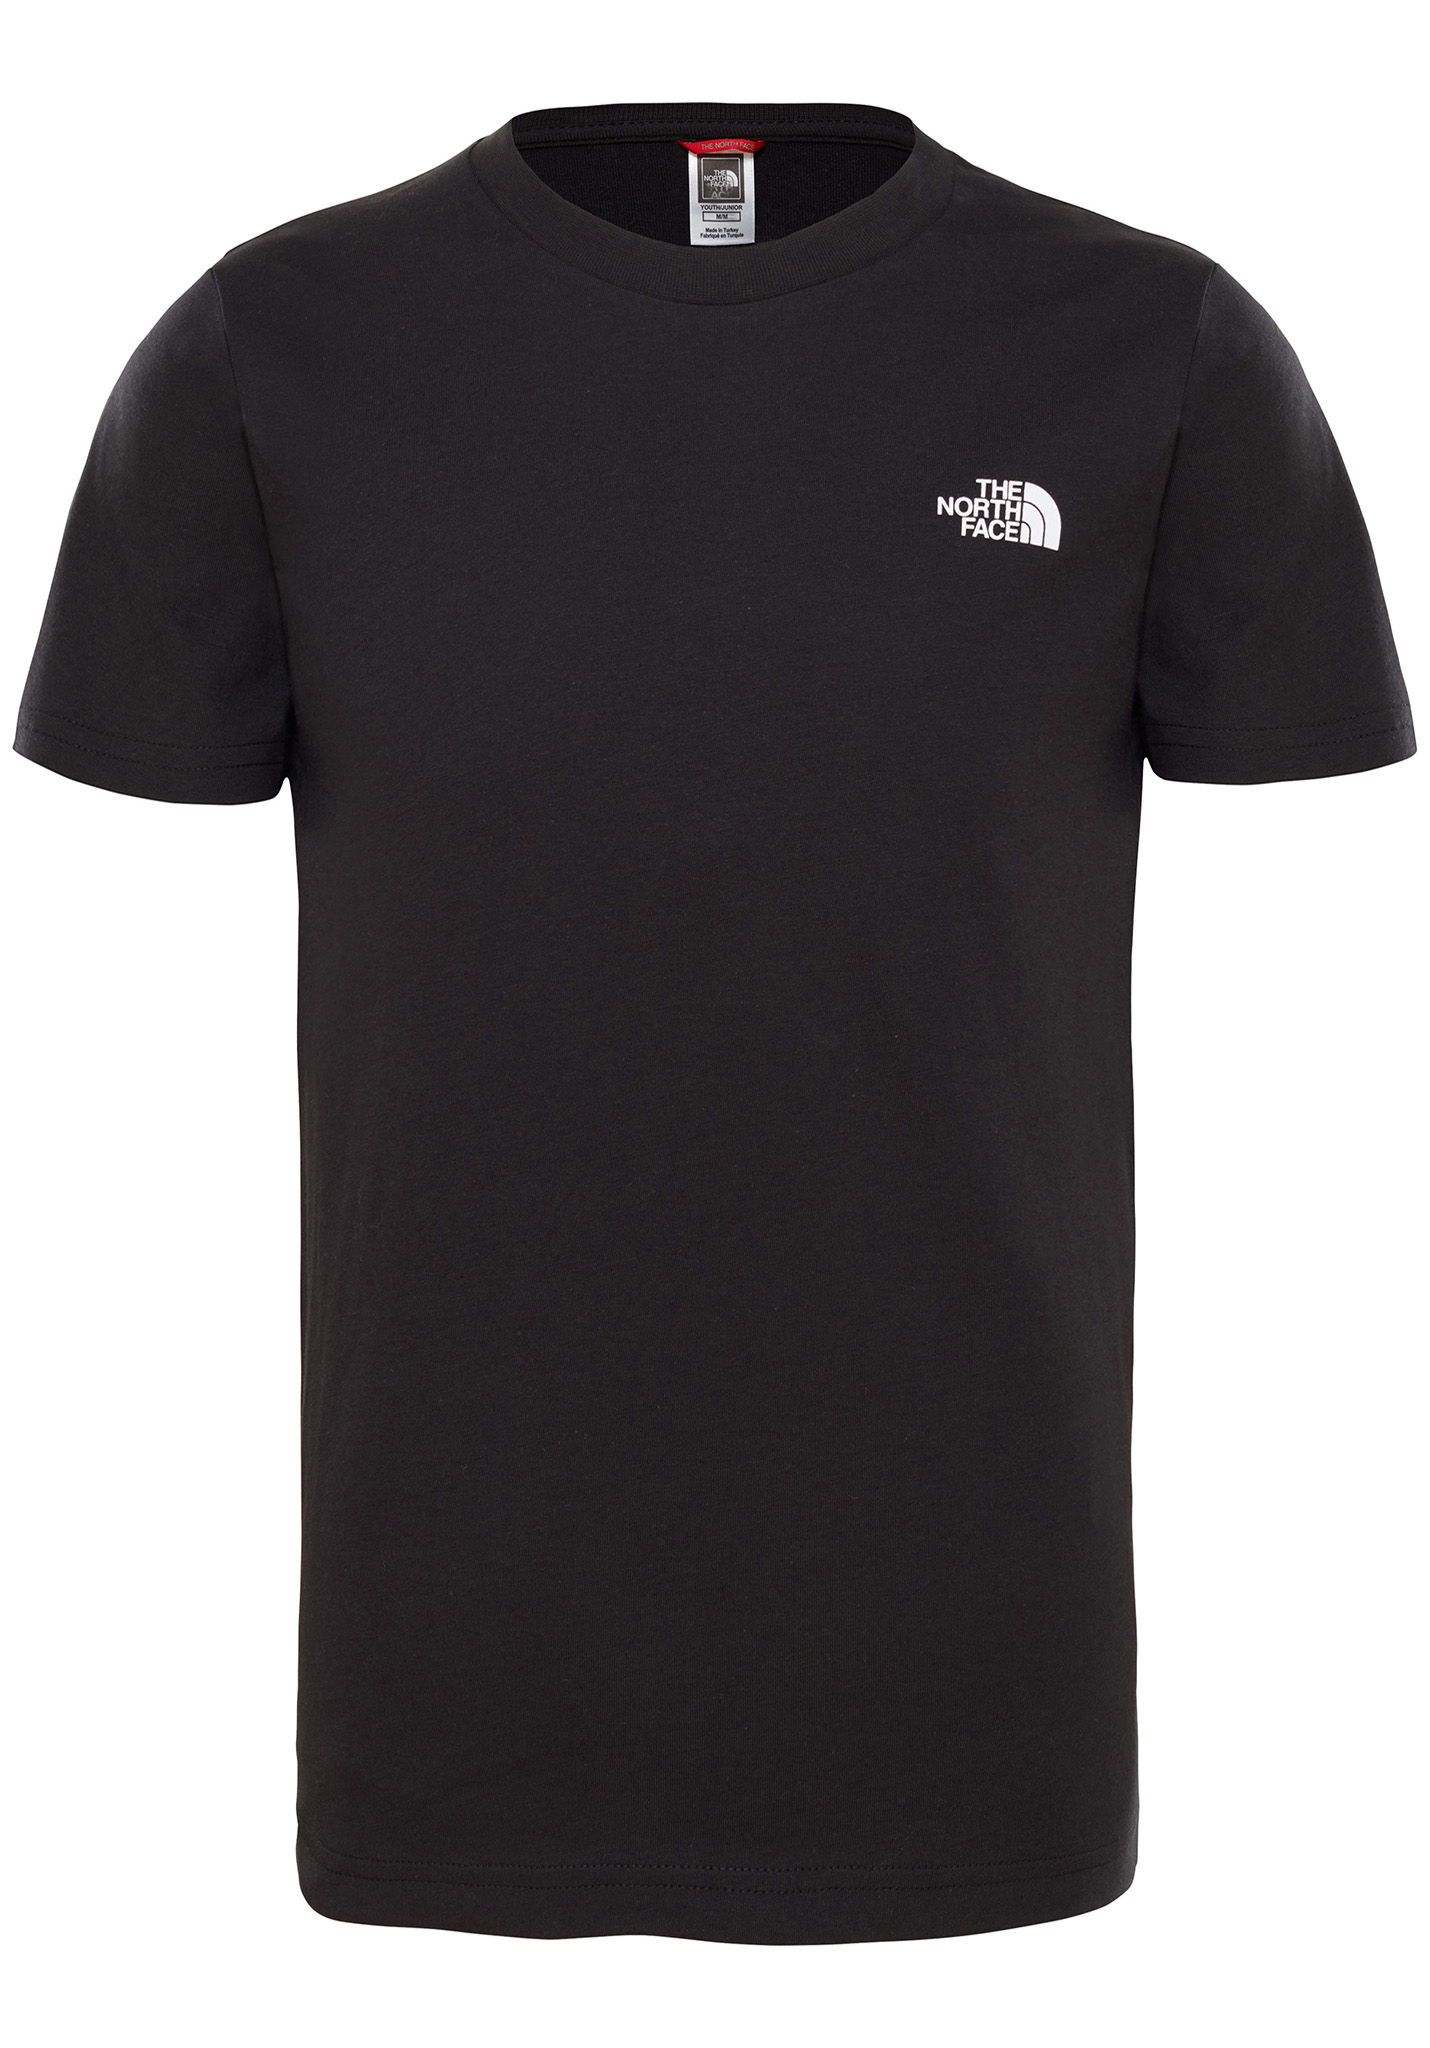 The North Face Simple Dome T-Shirt black XL